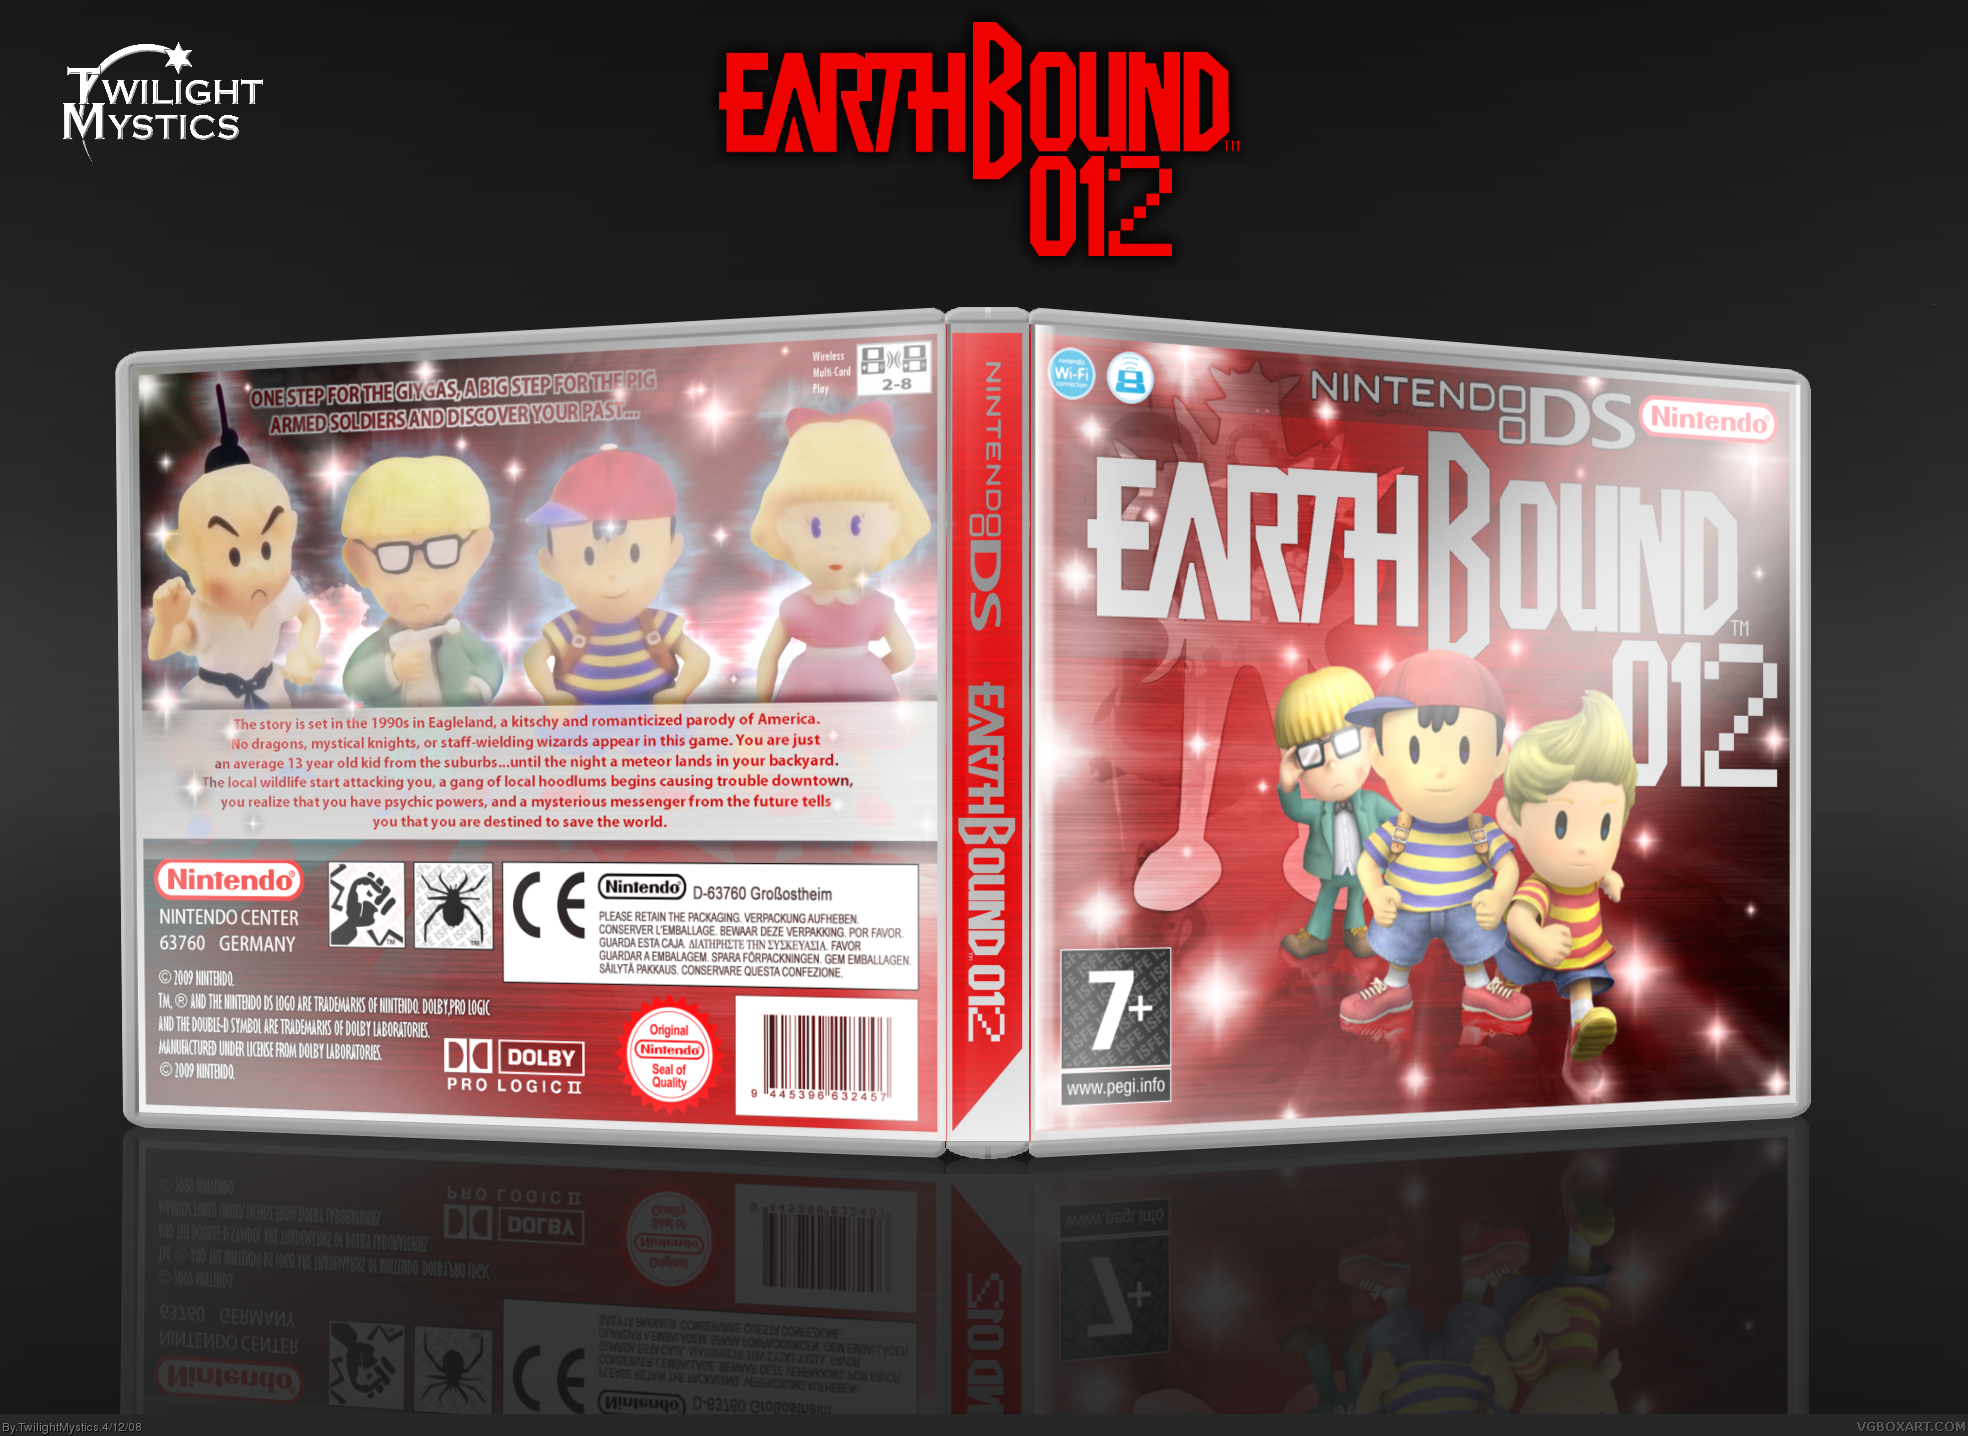 Earthbound 012 box cover